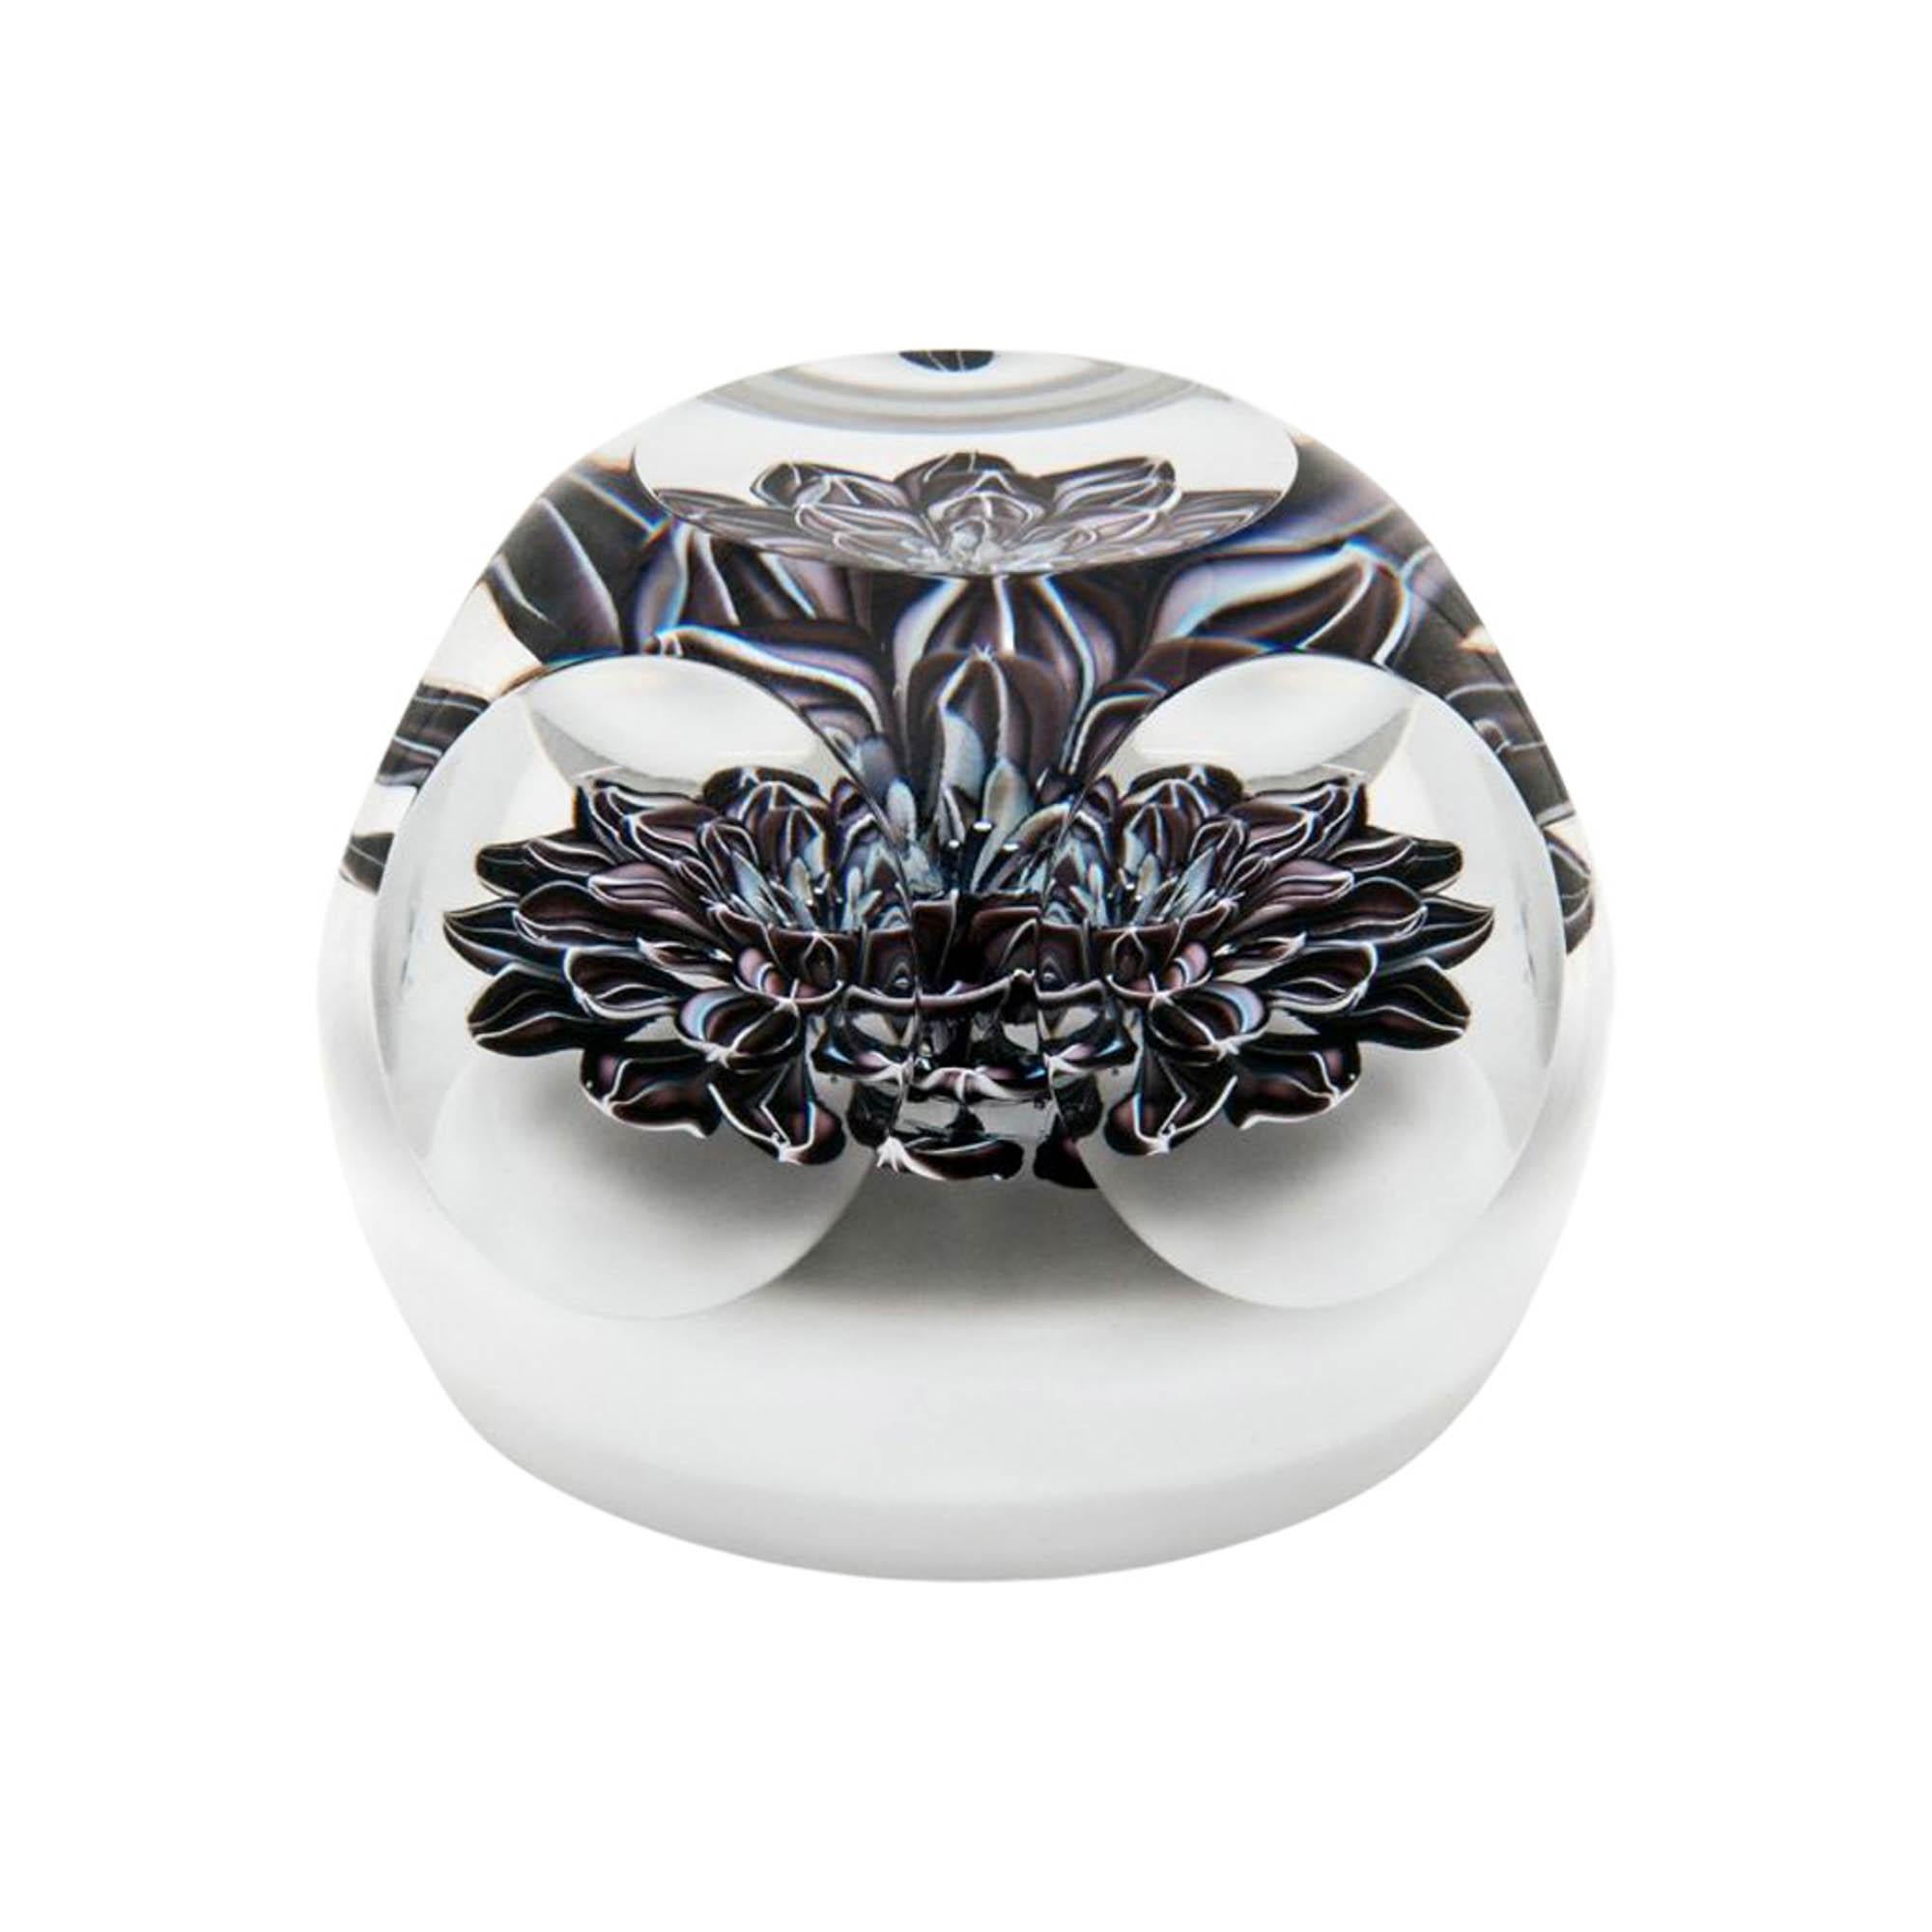 Mightychic offers an Hermes Saint-Louis Crystal 50 piece Limited Edition Dahlia Noir 2015 paperweight.
This exquisite crystal paperweight is #17 of 50.
Exquisite detail and craftsmanship creates a stunning piece for the home, or a superb gifting